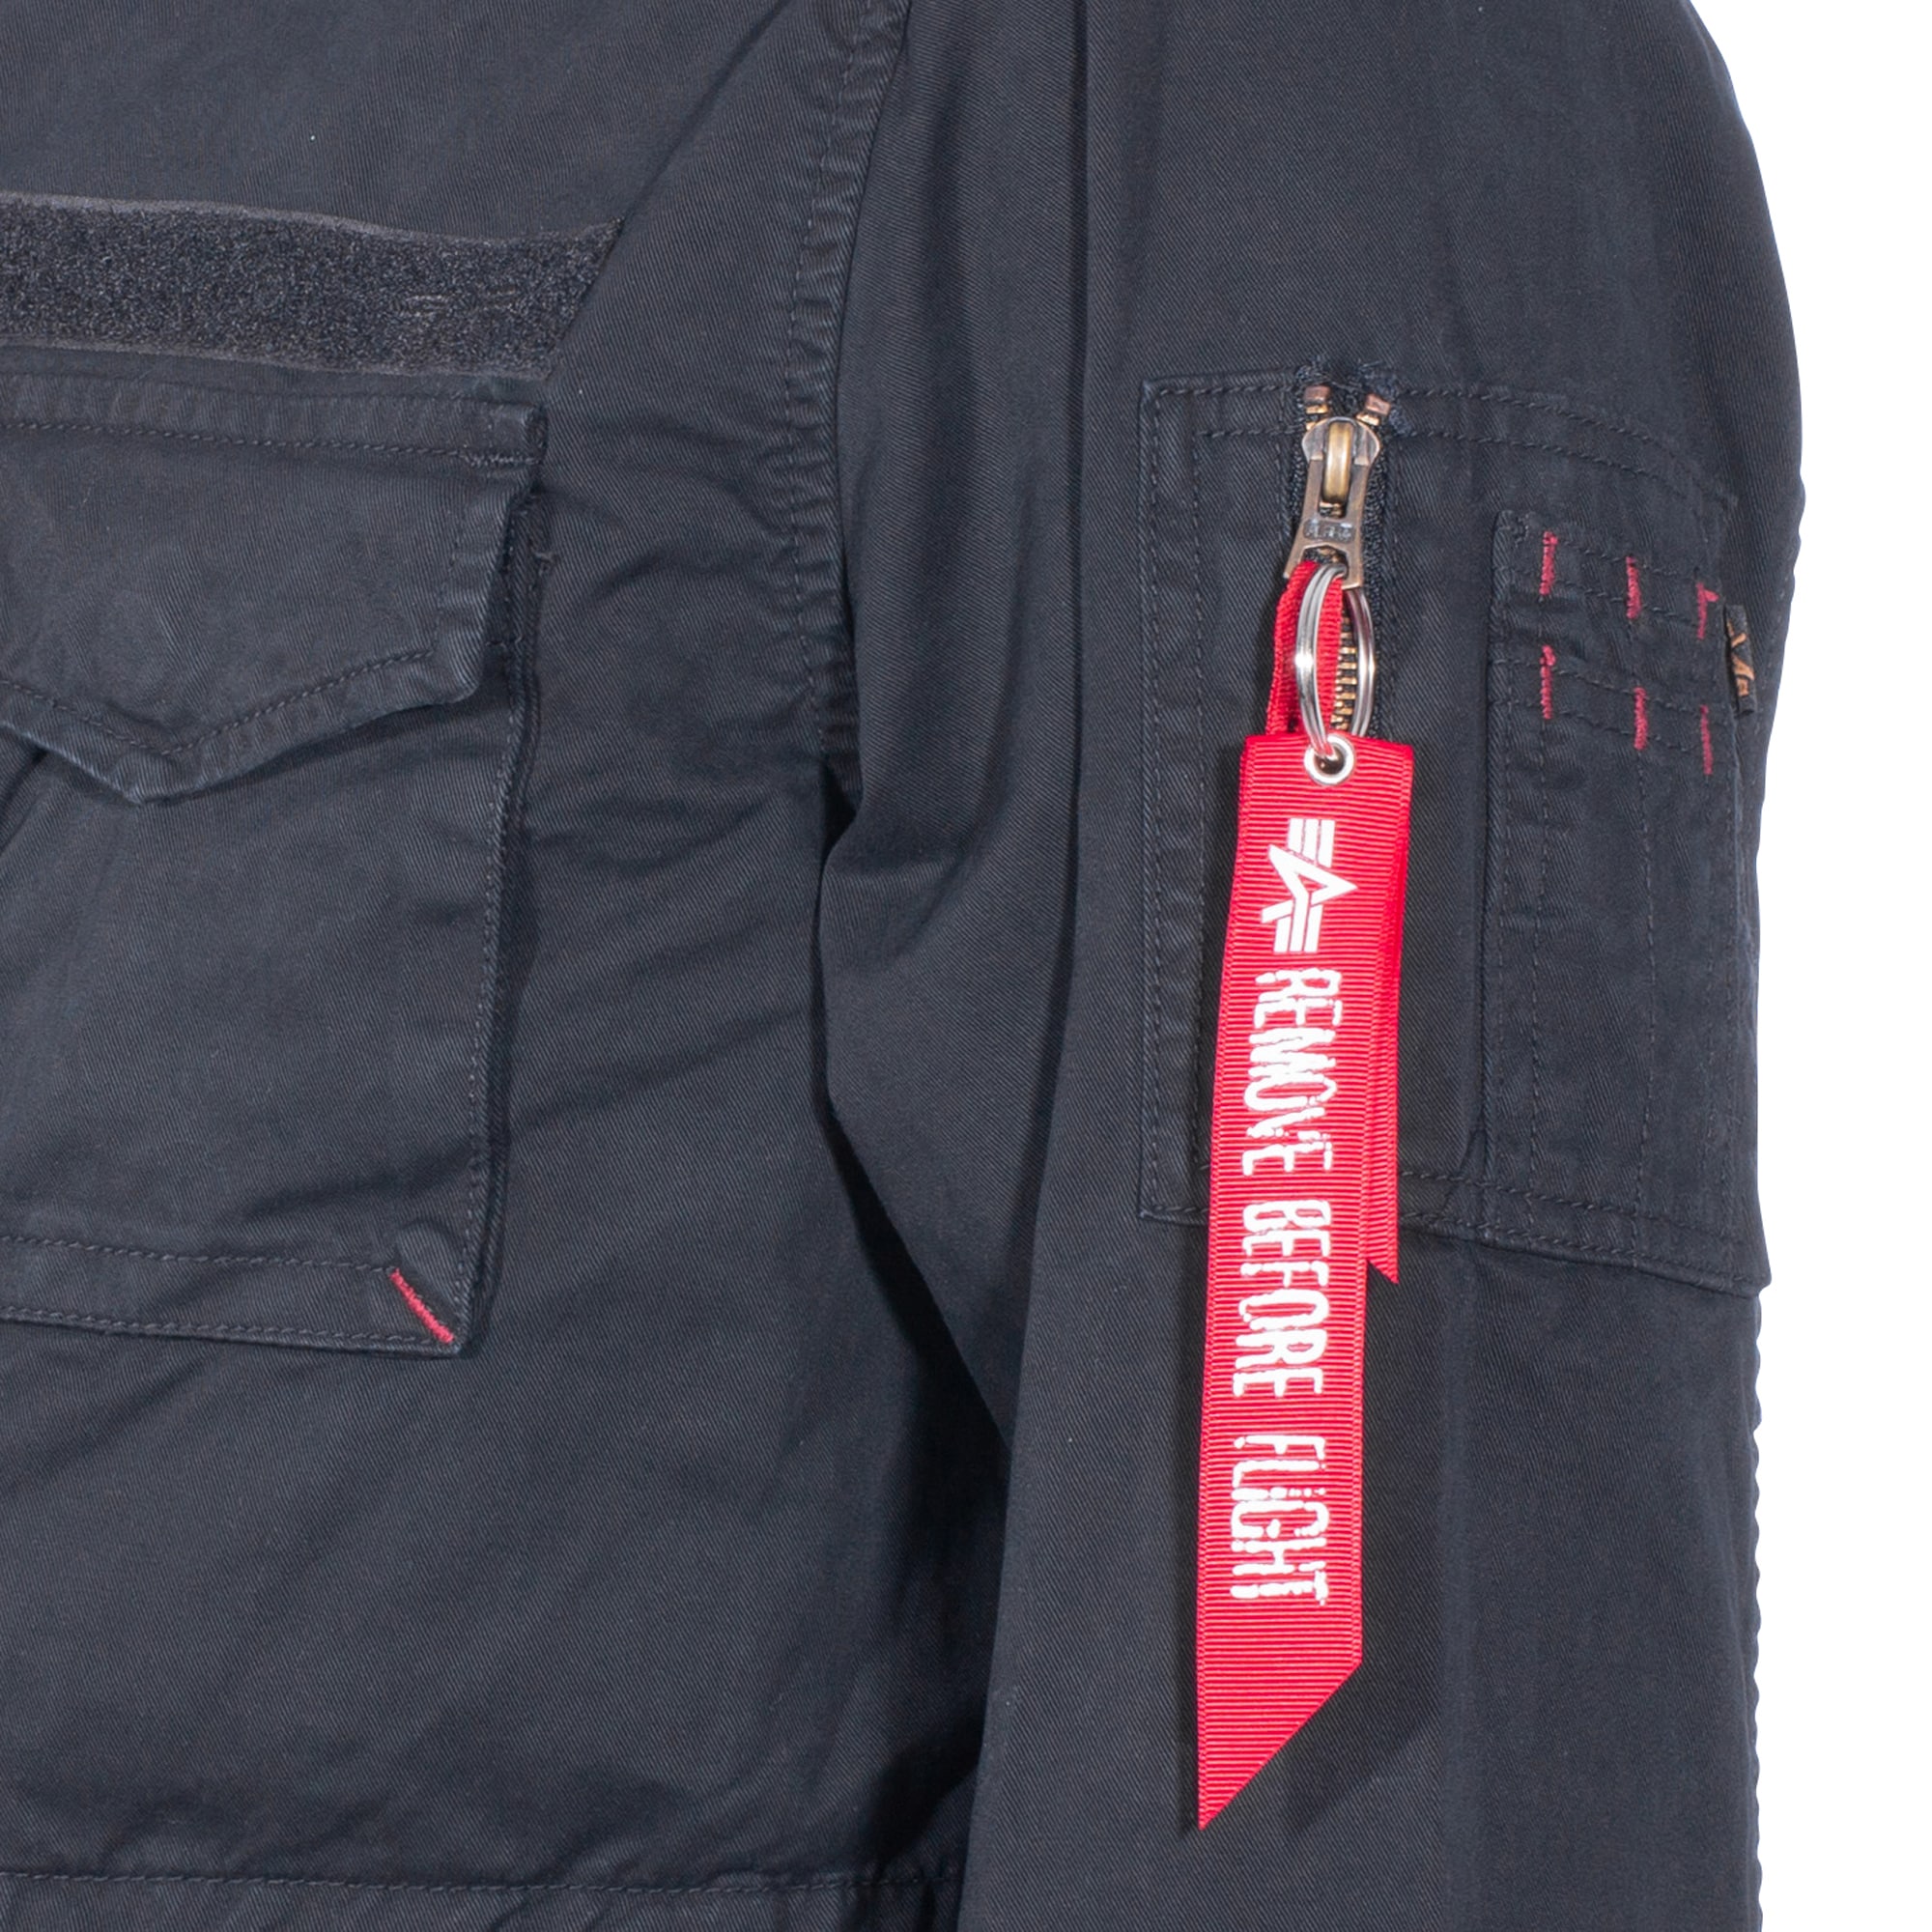 Jacket A Field Alpha by Industries Huntington Purchase black the